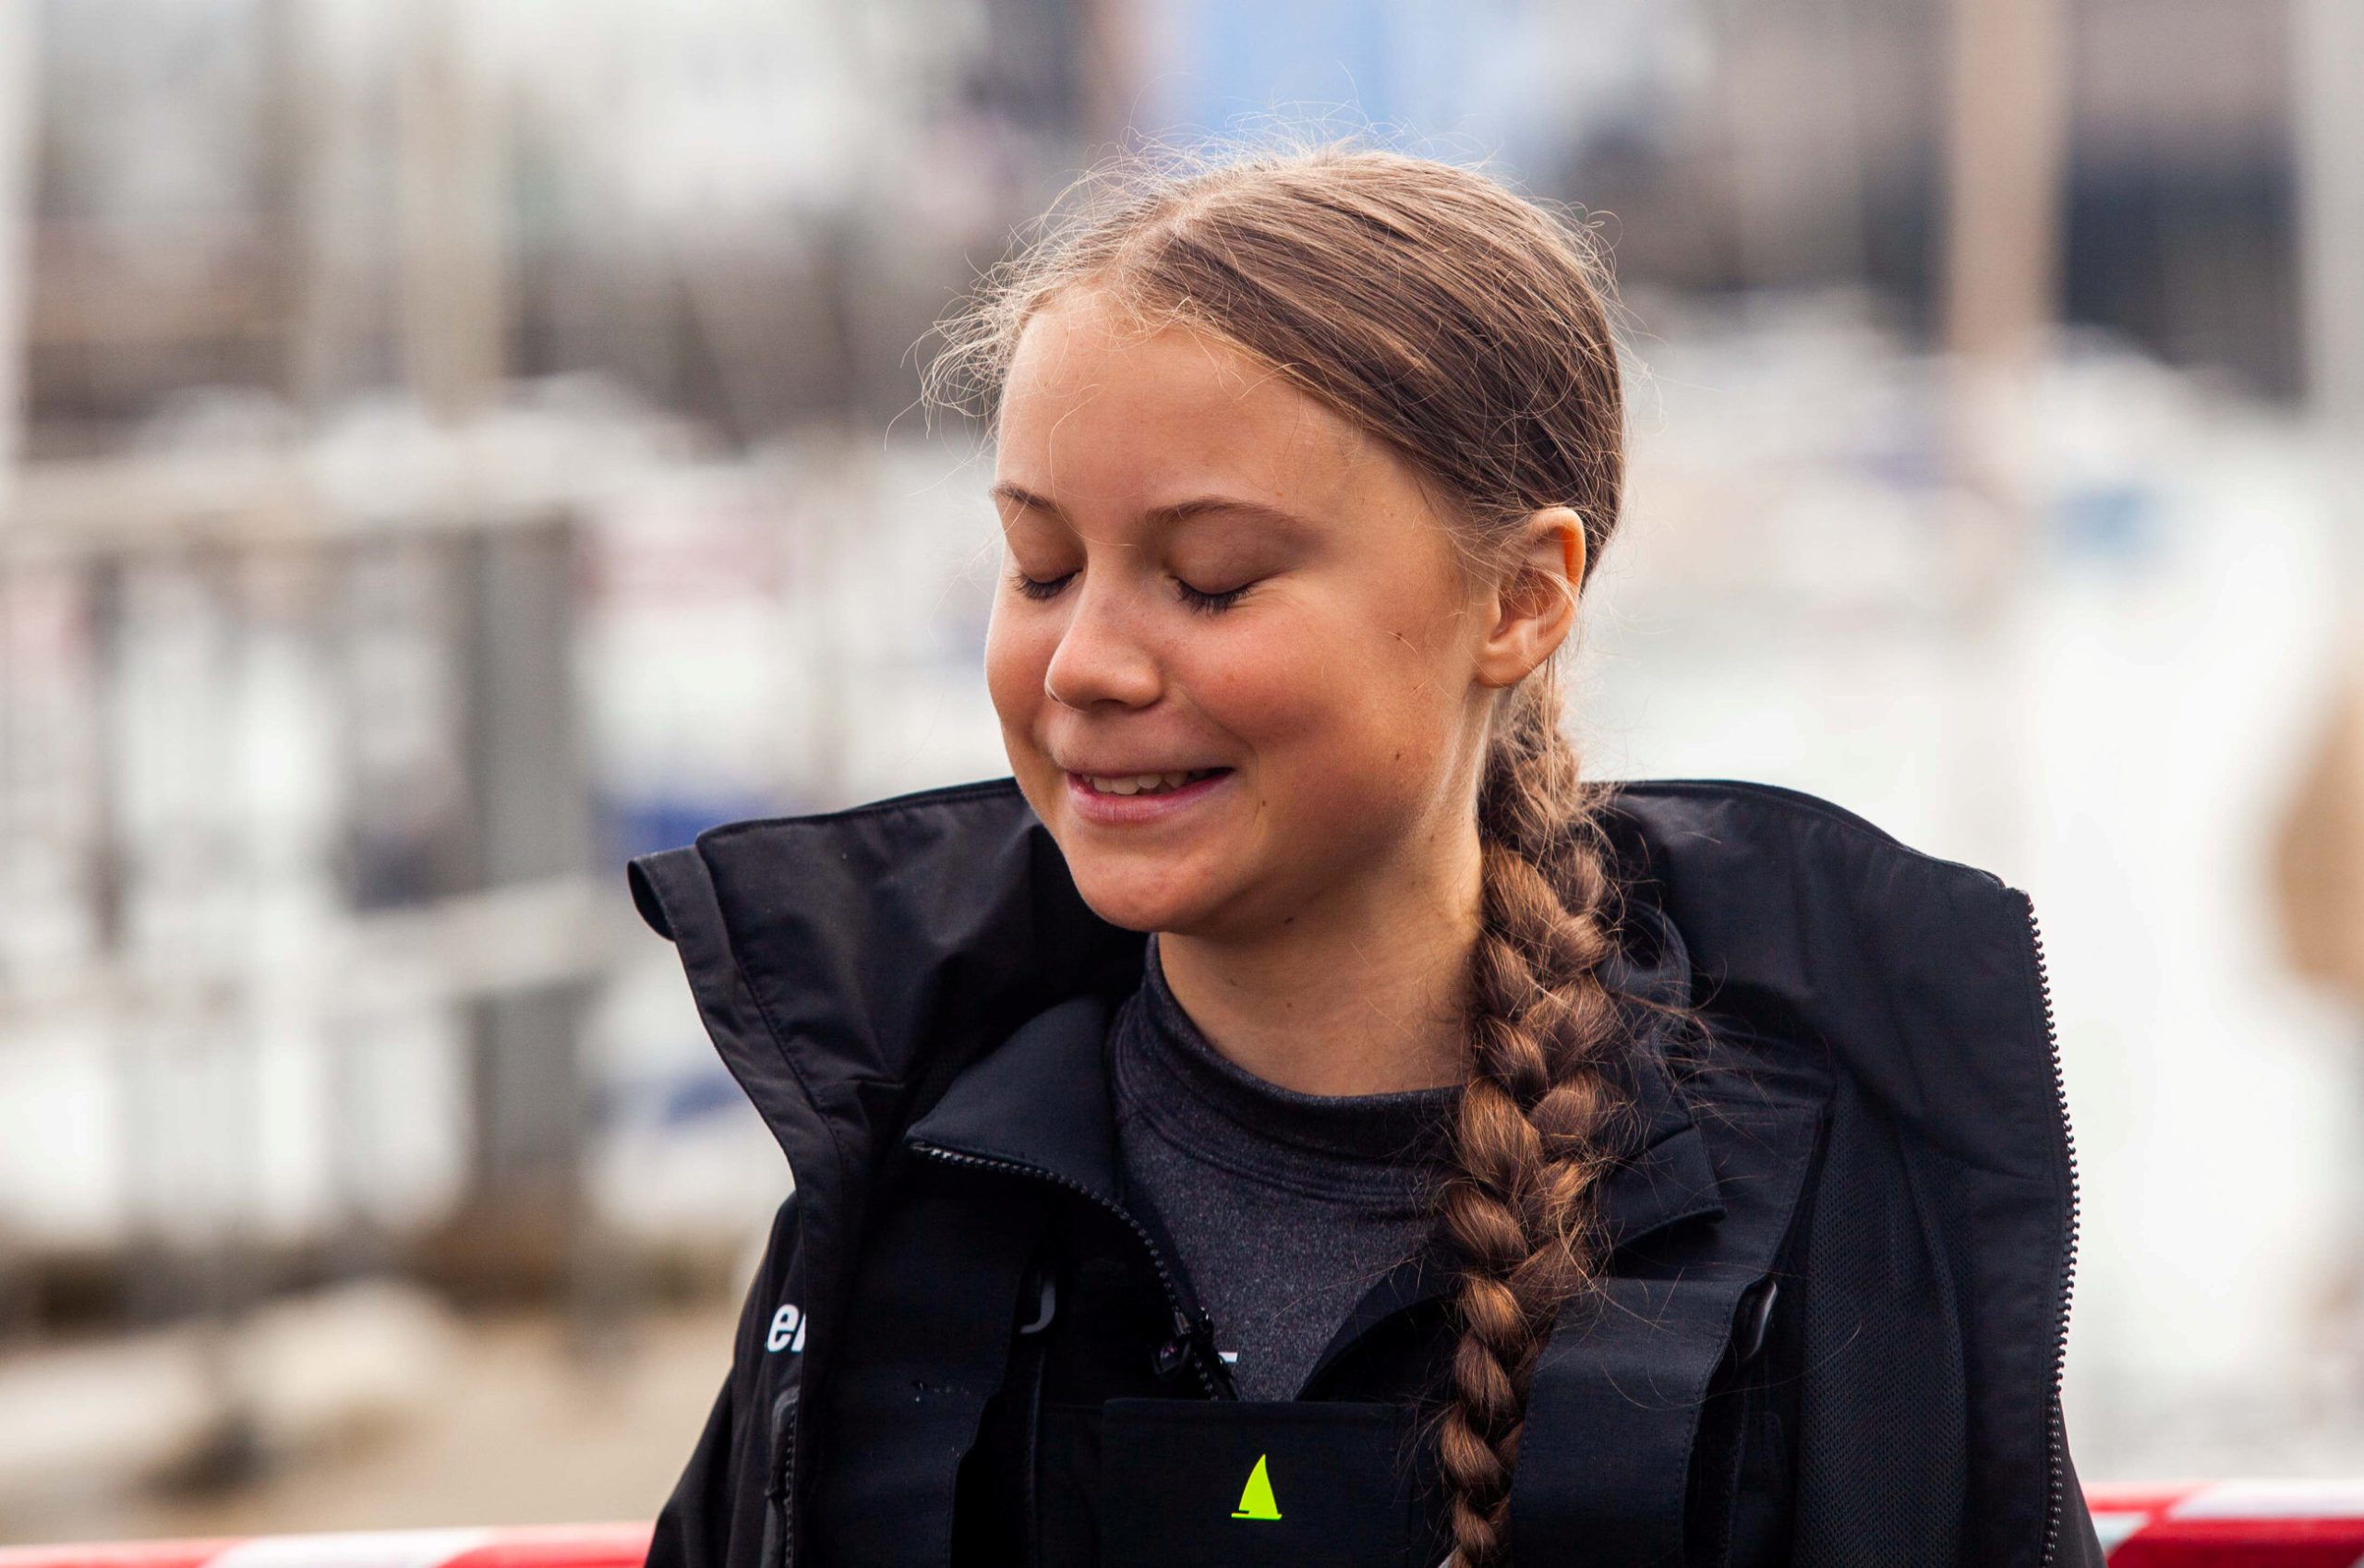 Greta Thunberg's father: She is happy and I am worried